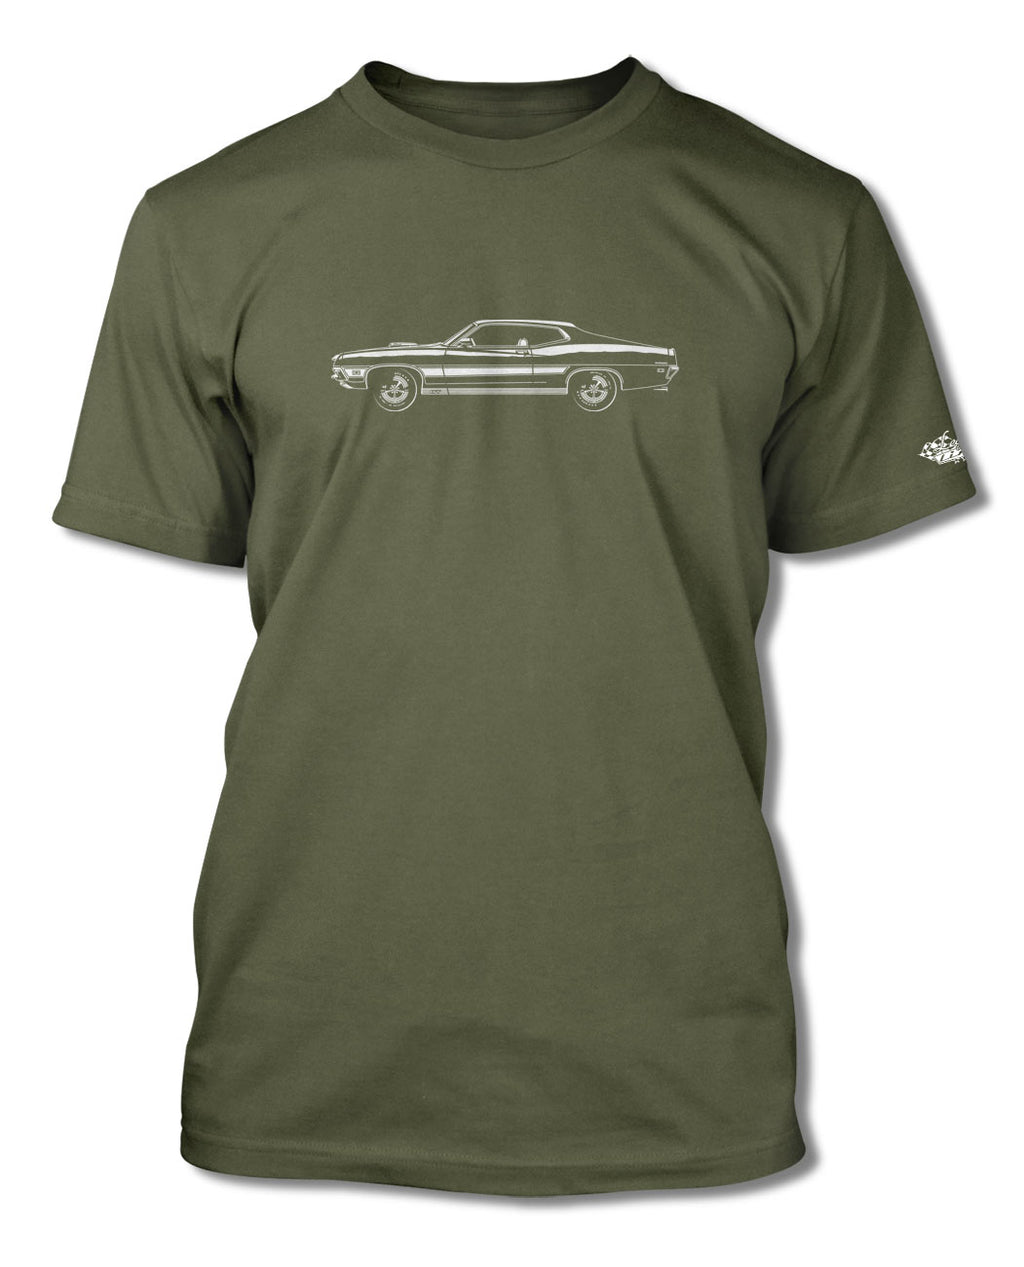 1971 Ford Torino GT Cobra jet Fastback with Stripes T-Shirt - Men - Side View